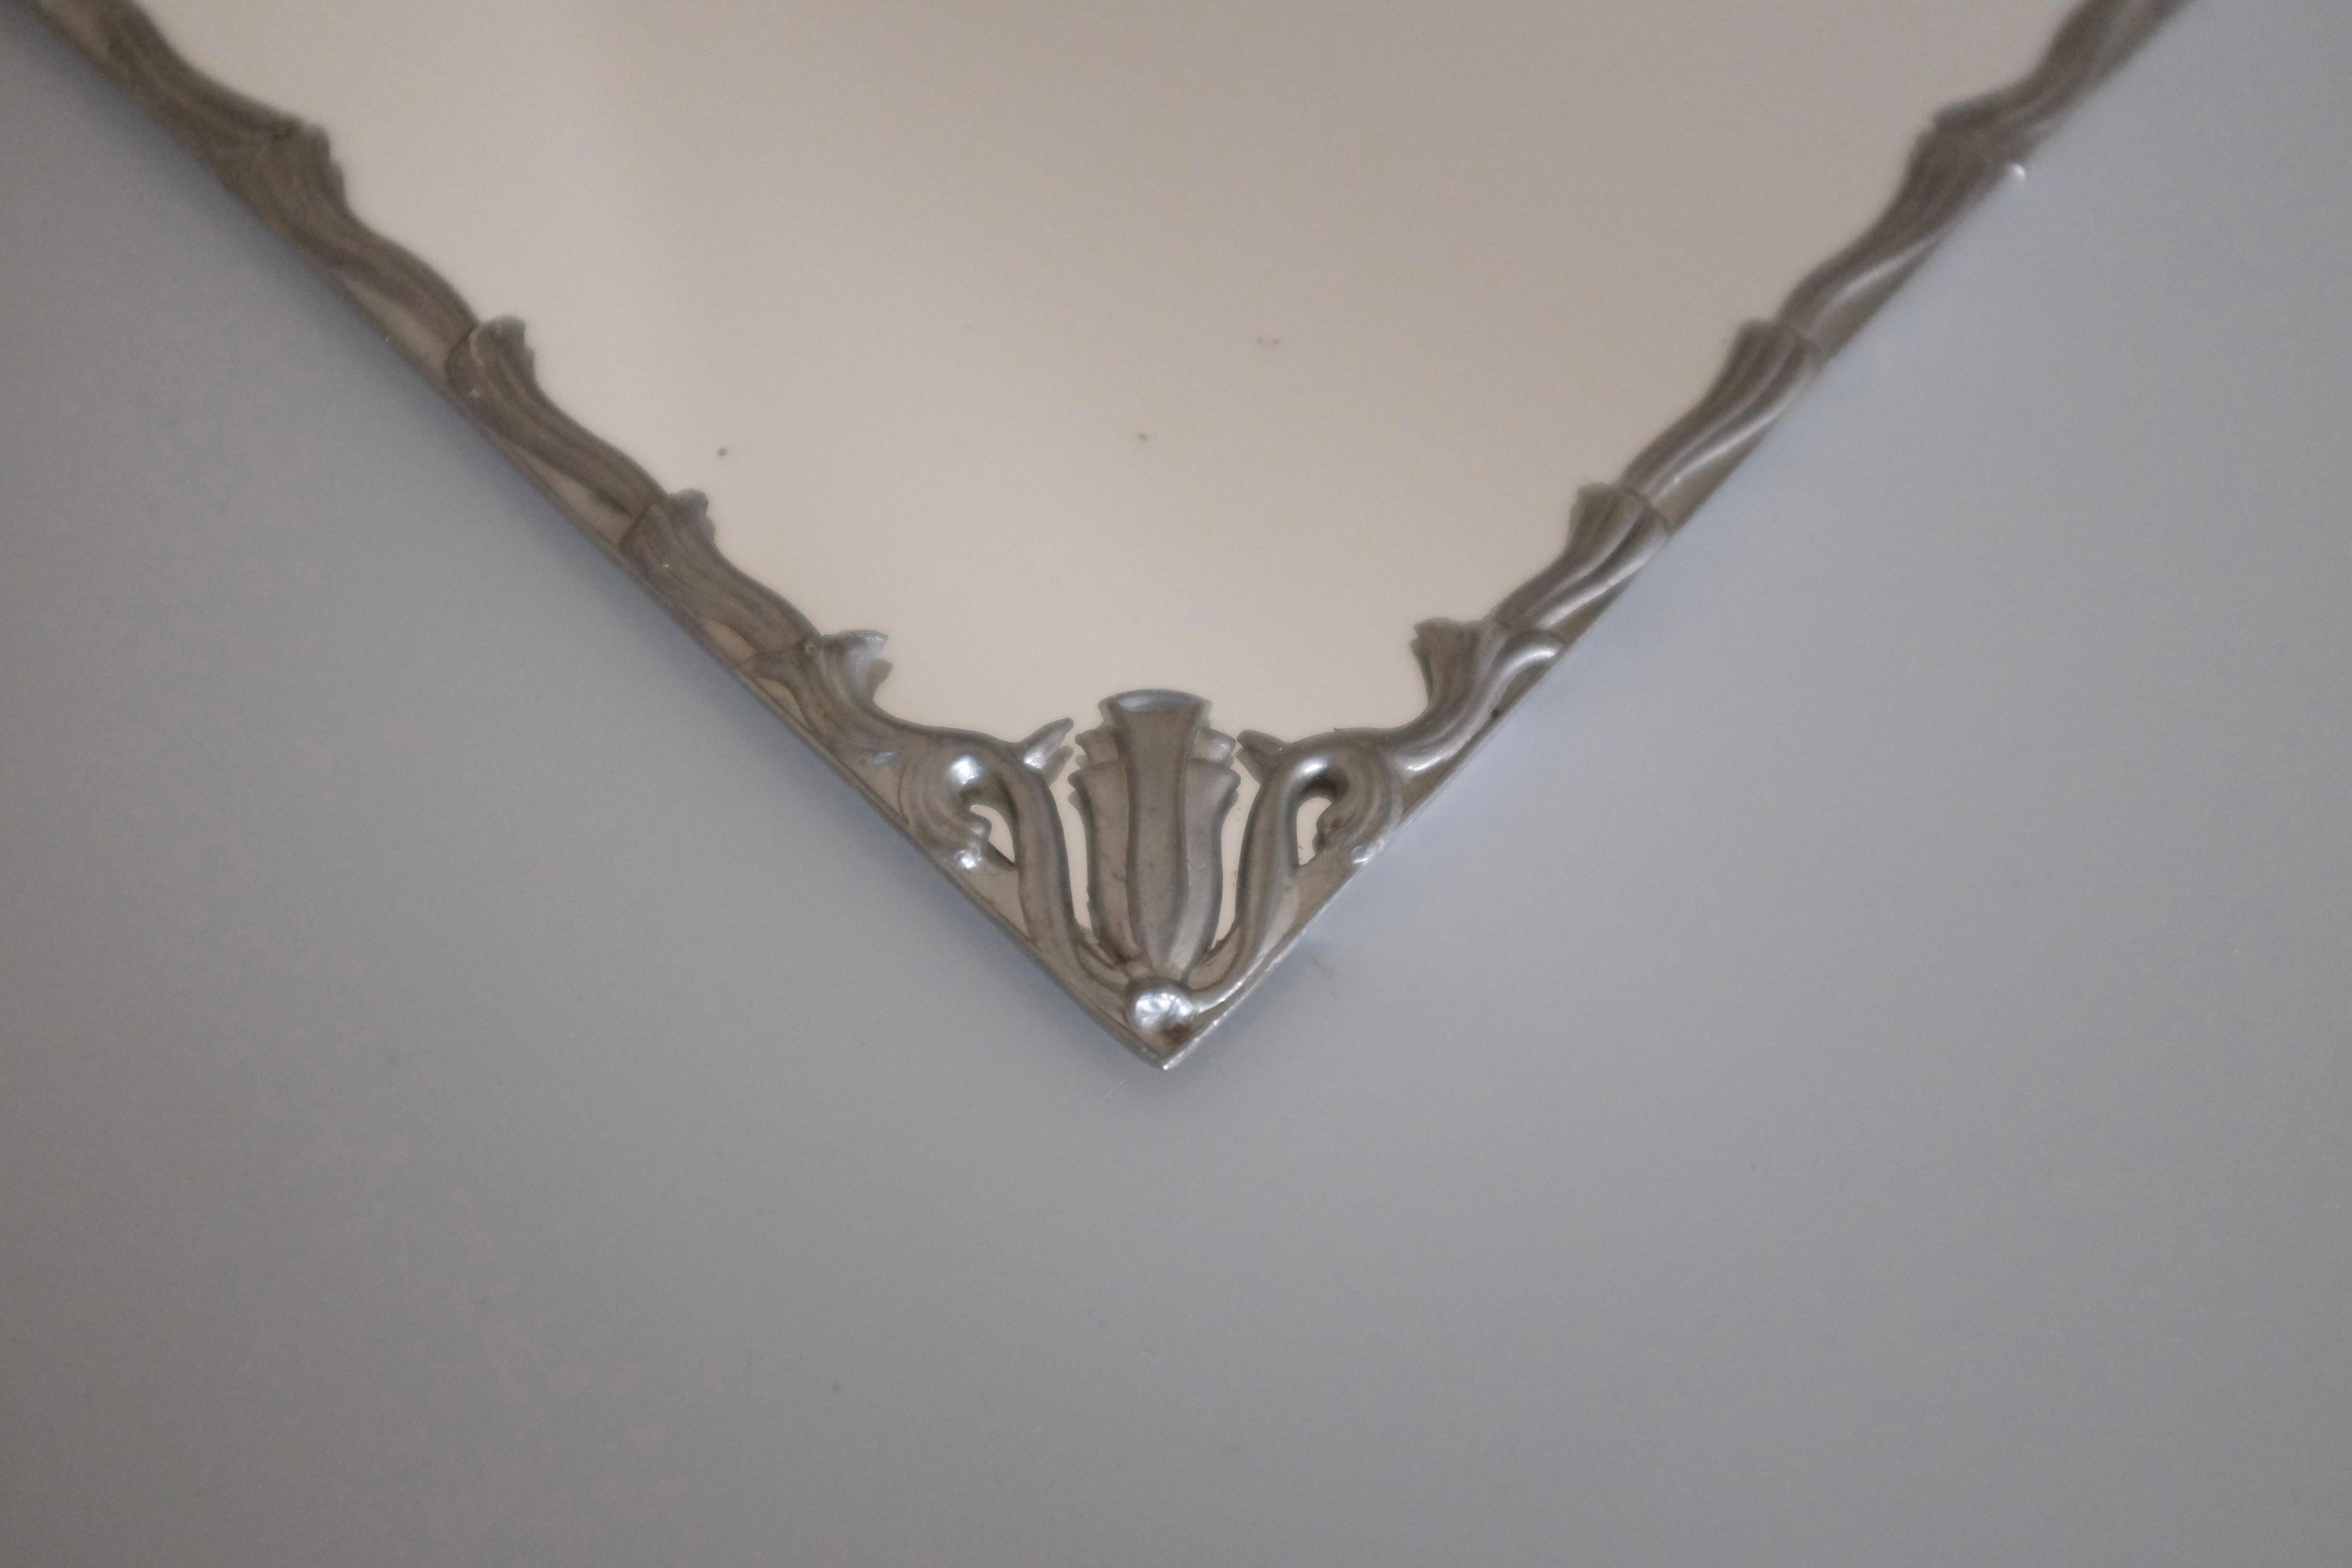 Small square shaped vintage Swedish Modern Pewter Mirror with decorative organic flower and leaf decoration around the border. Hanging on the side with vintage glass it is a very charming mirror. From around the the 1930s. Age appropriate wear and